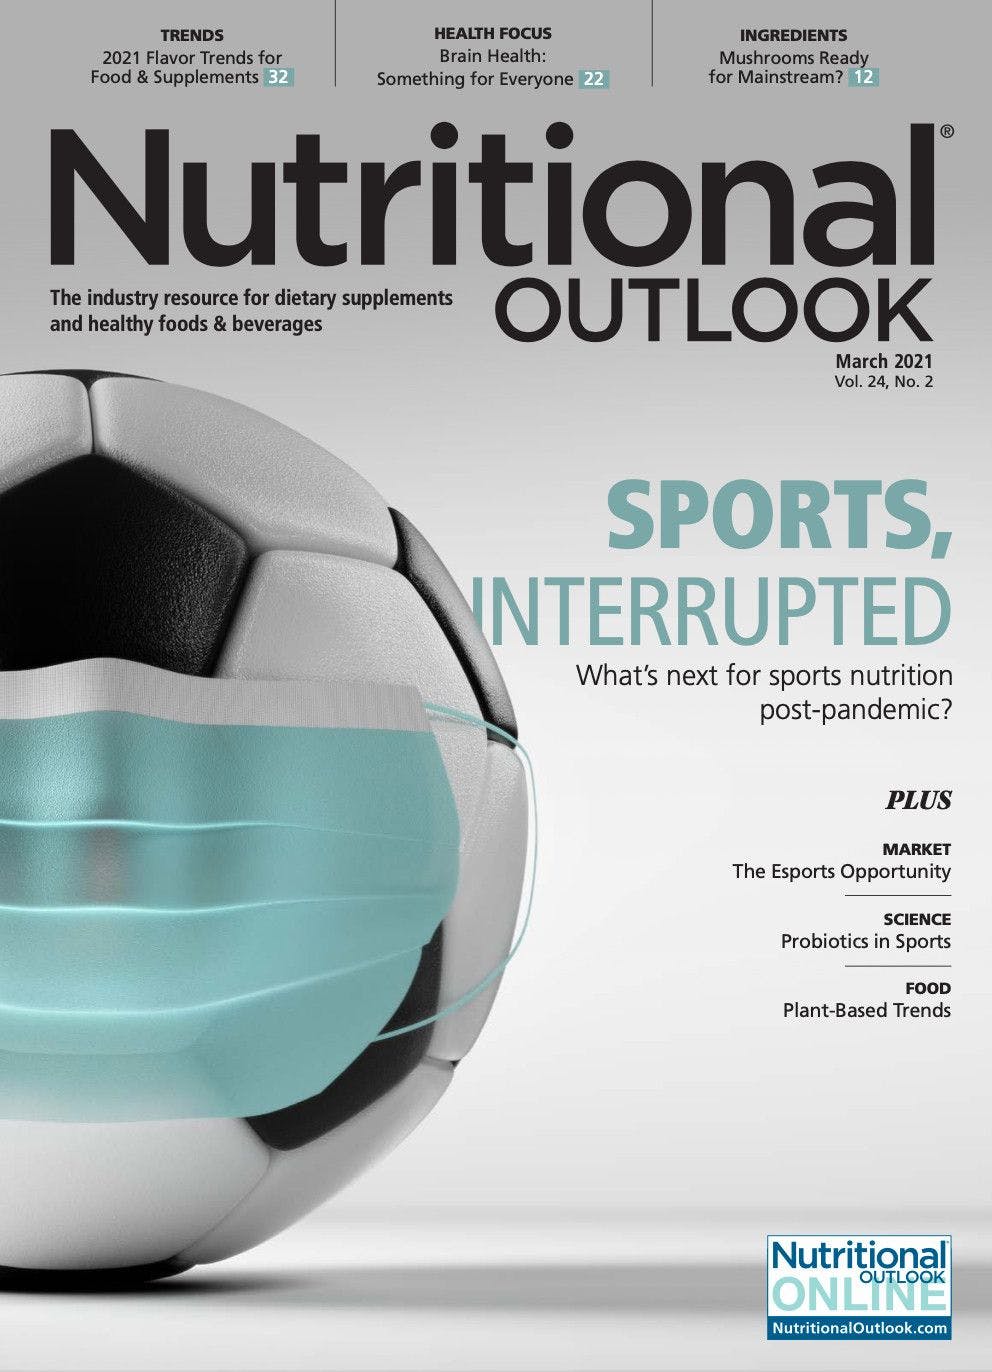 Nutritional Outlook Vol. 24 No. 2